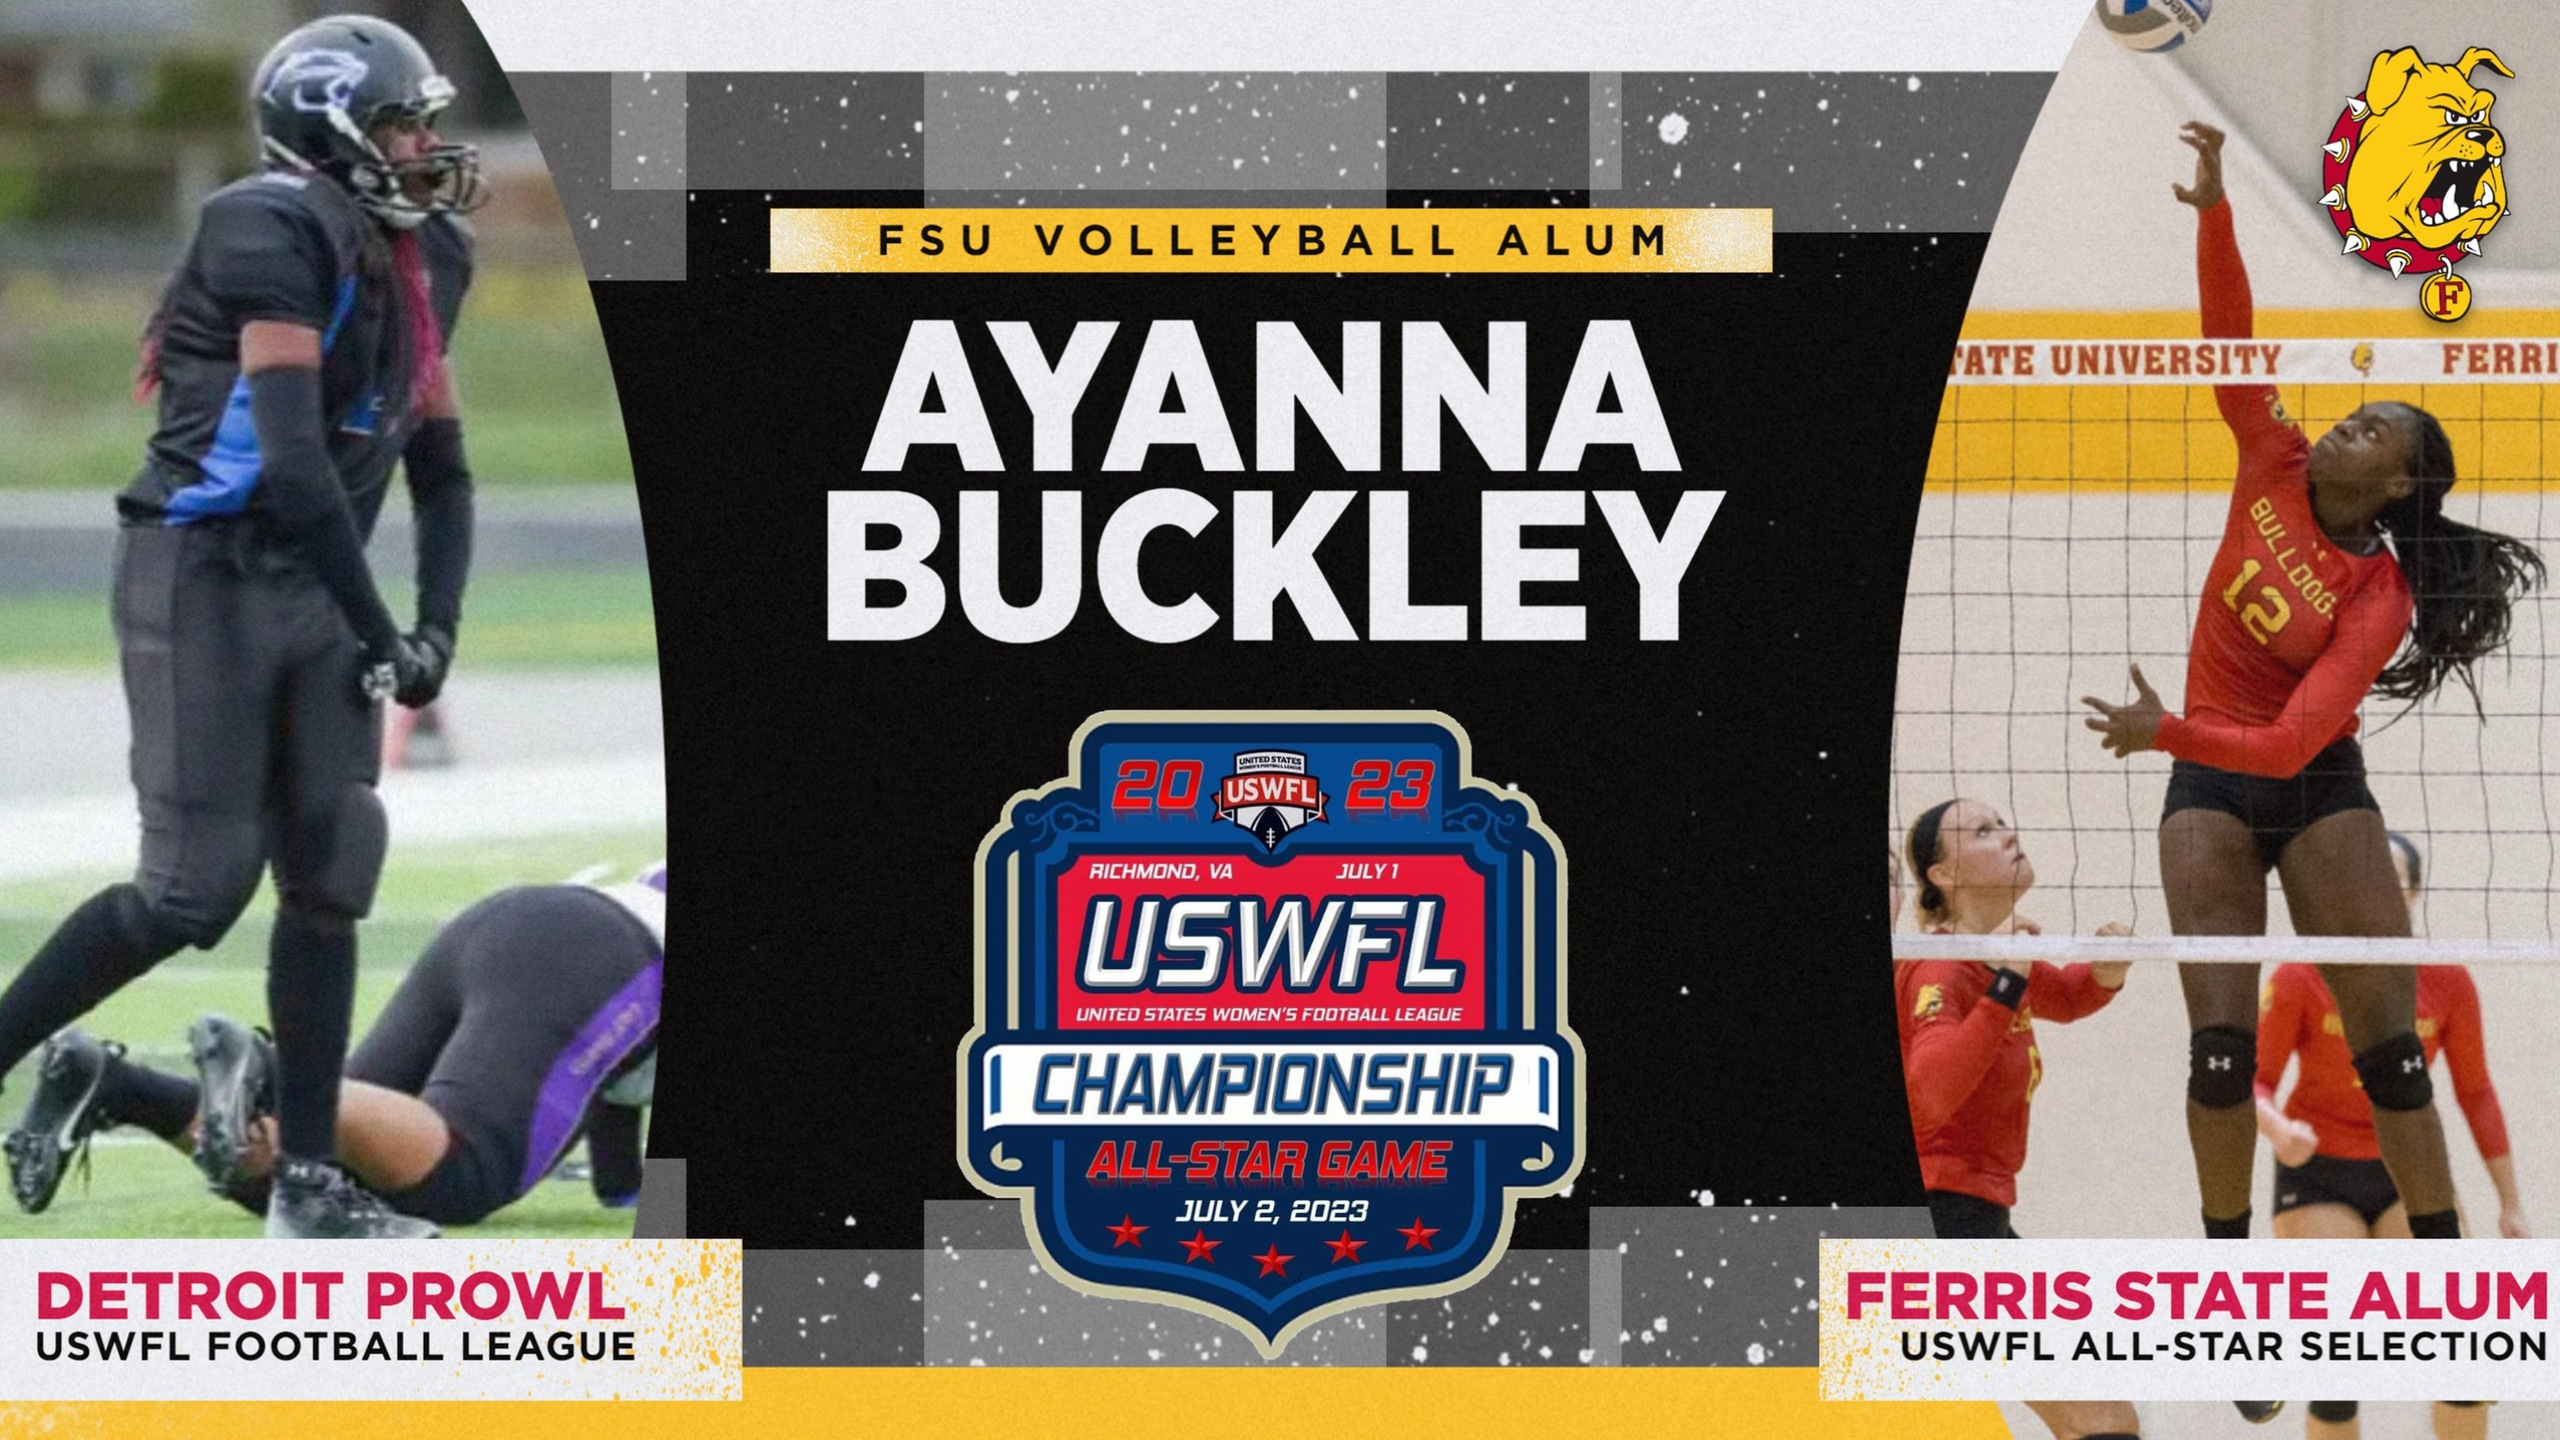 FSU Volleyball Alum Ayanna Buckley To Compete In Pro Football League Championship Weekend